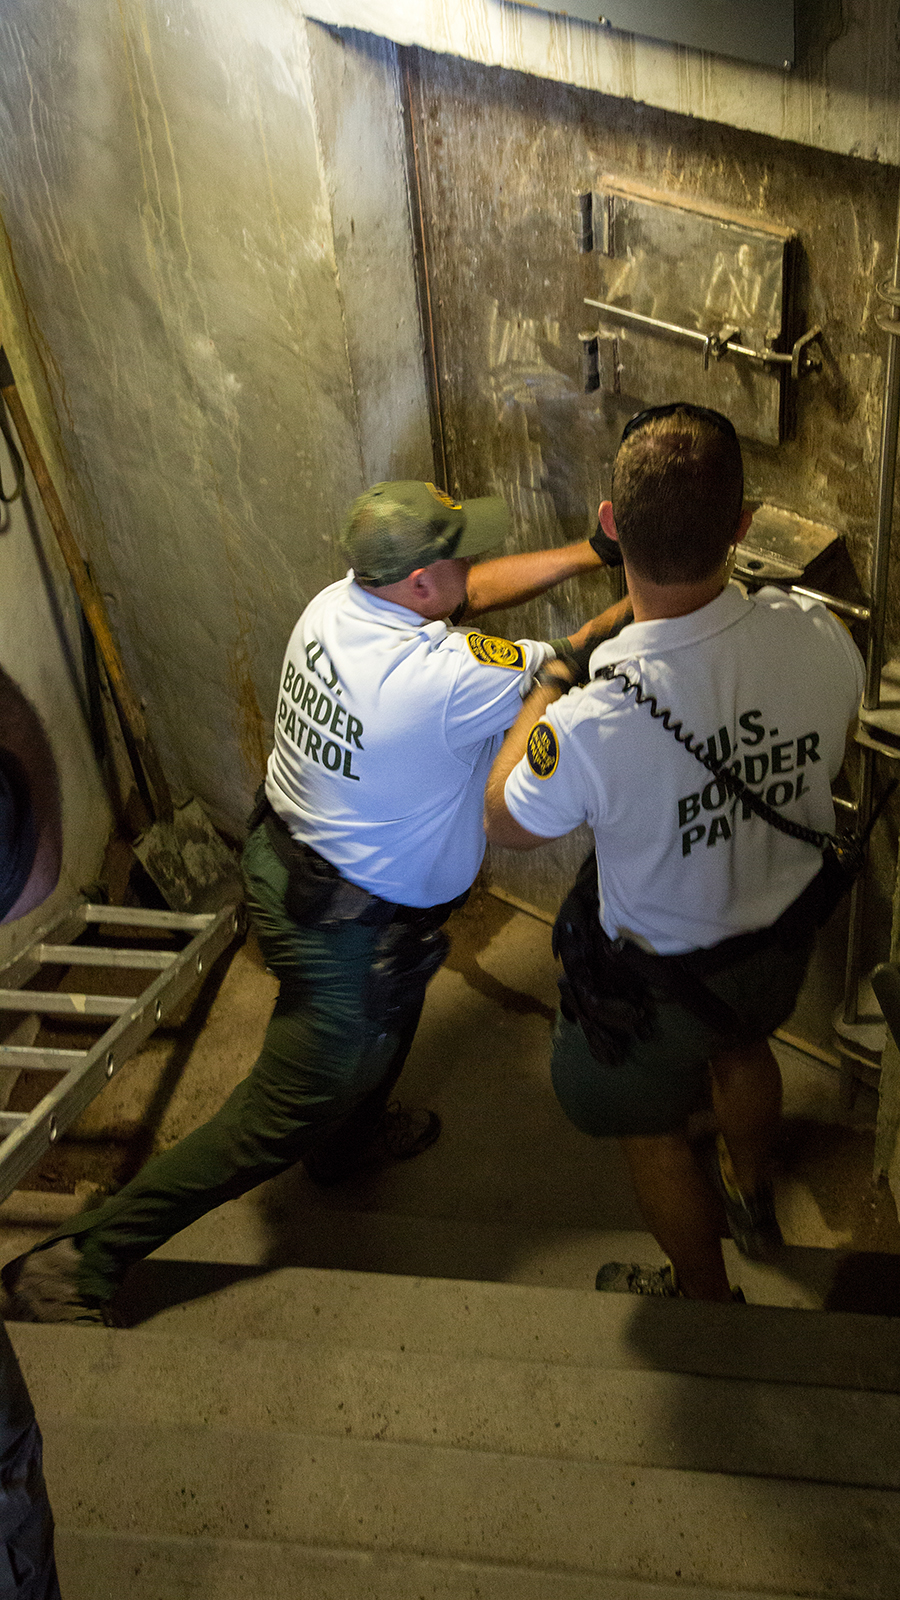 Photo of Border Patrol agents opening an entrance to an area in the drainage system.